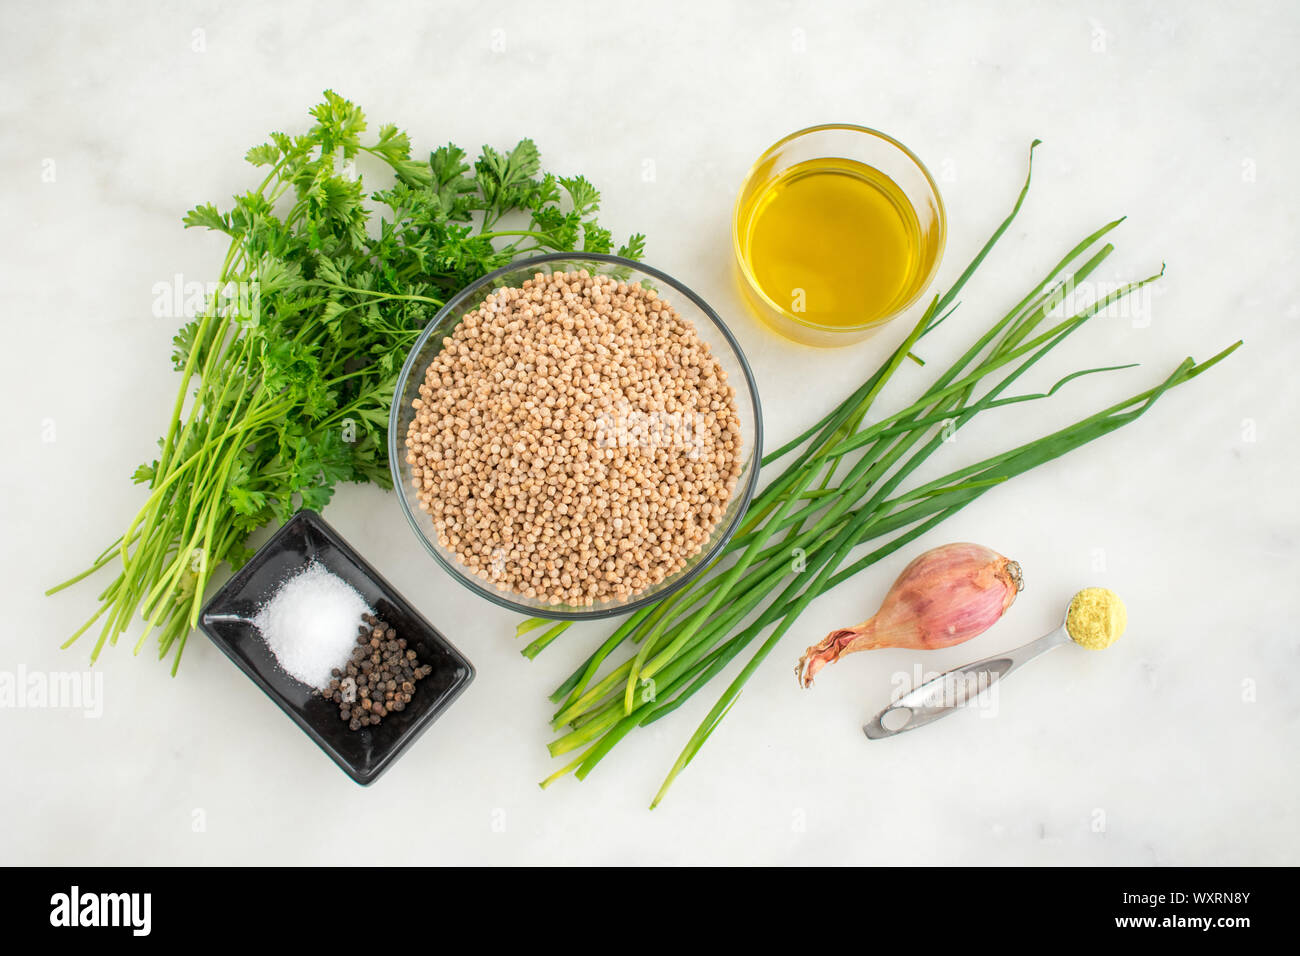 Herbed Couscous Pilaf with Chives Ingredients: Whole wheat pearl couscous, fresh herbs, and other ingredients used to make a savory side dish. Stock Photo